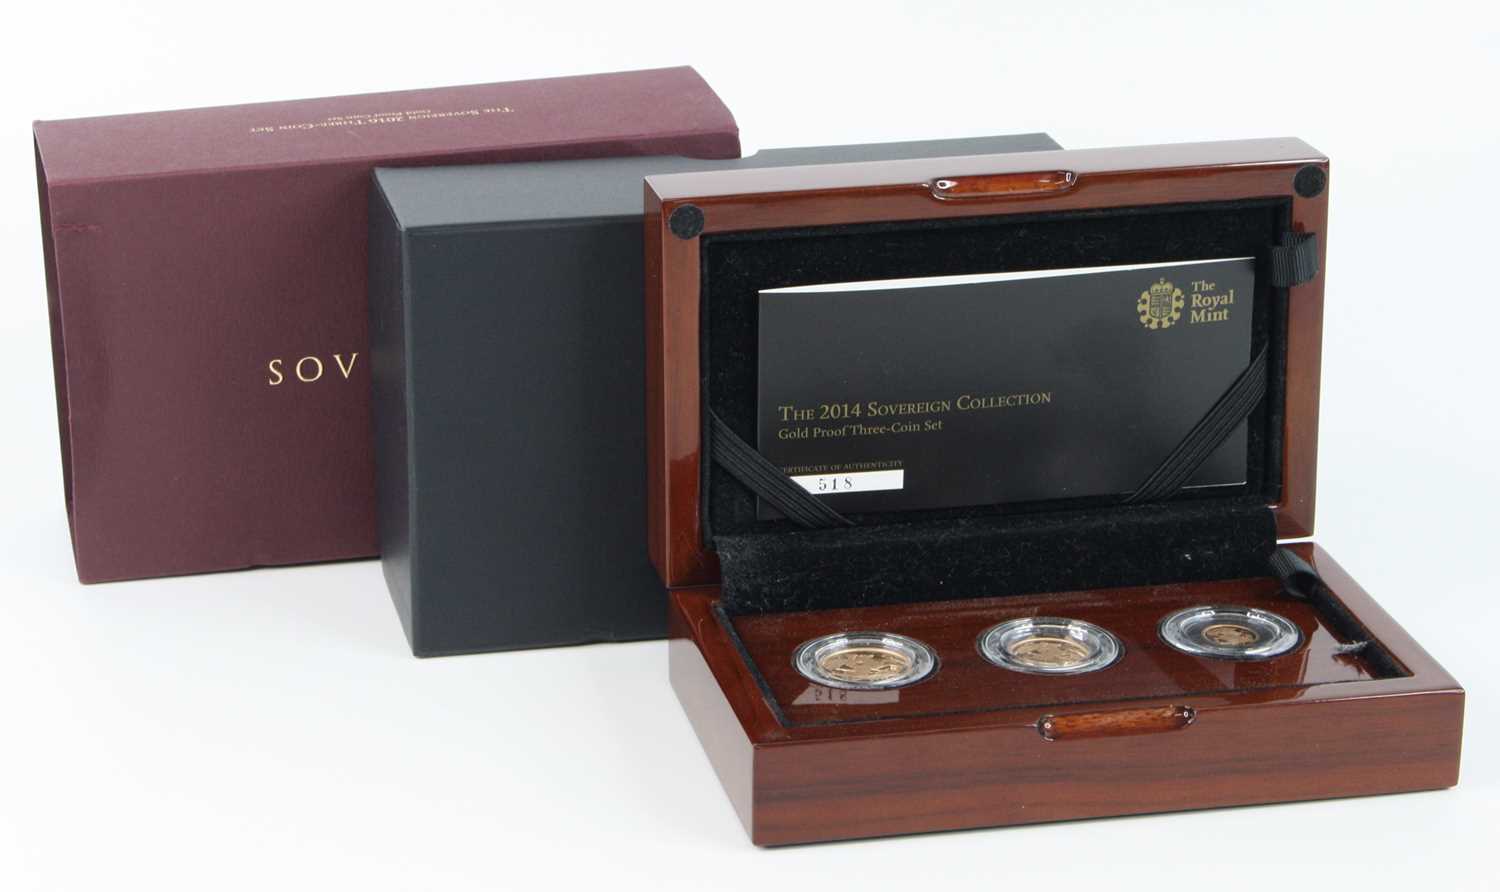 The Royal Mint, The 2014 Sovereign Collection Gold Proof Three-Coin Set, full, half and quarter